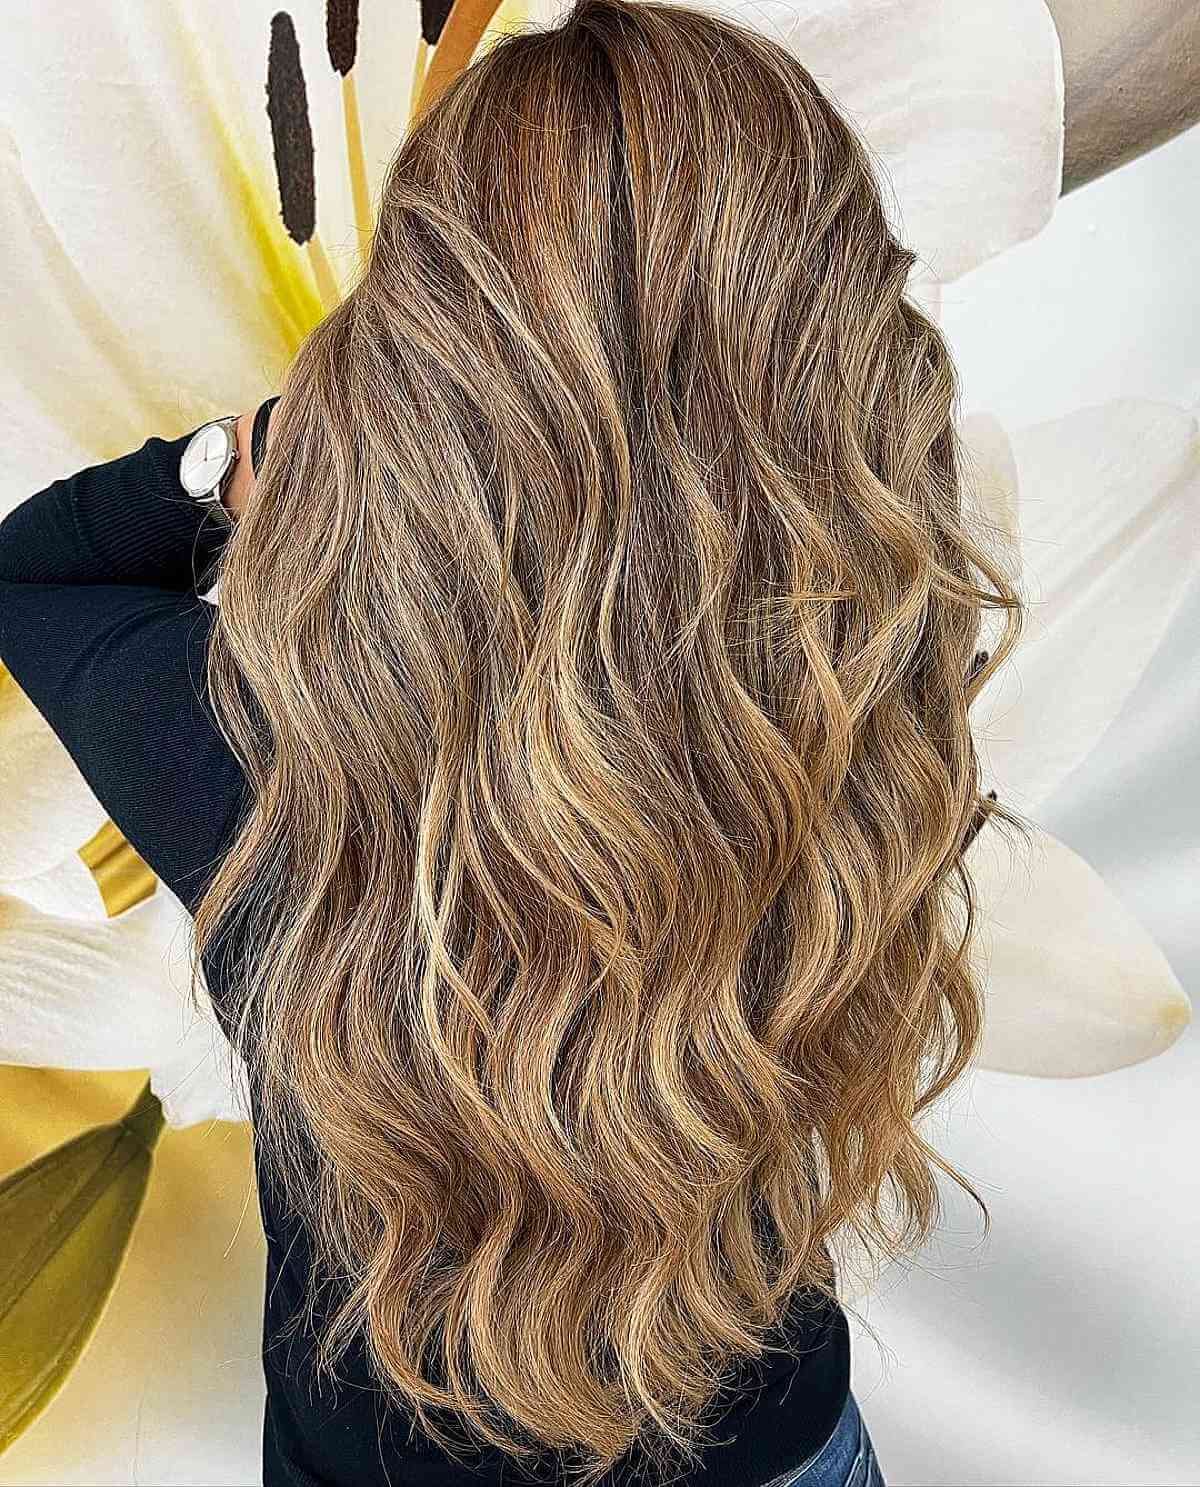 Warm Light Brown Hairstyle with Blonde Highlights with Lowlights